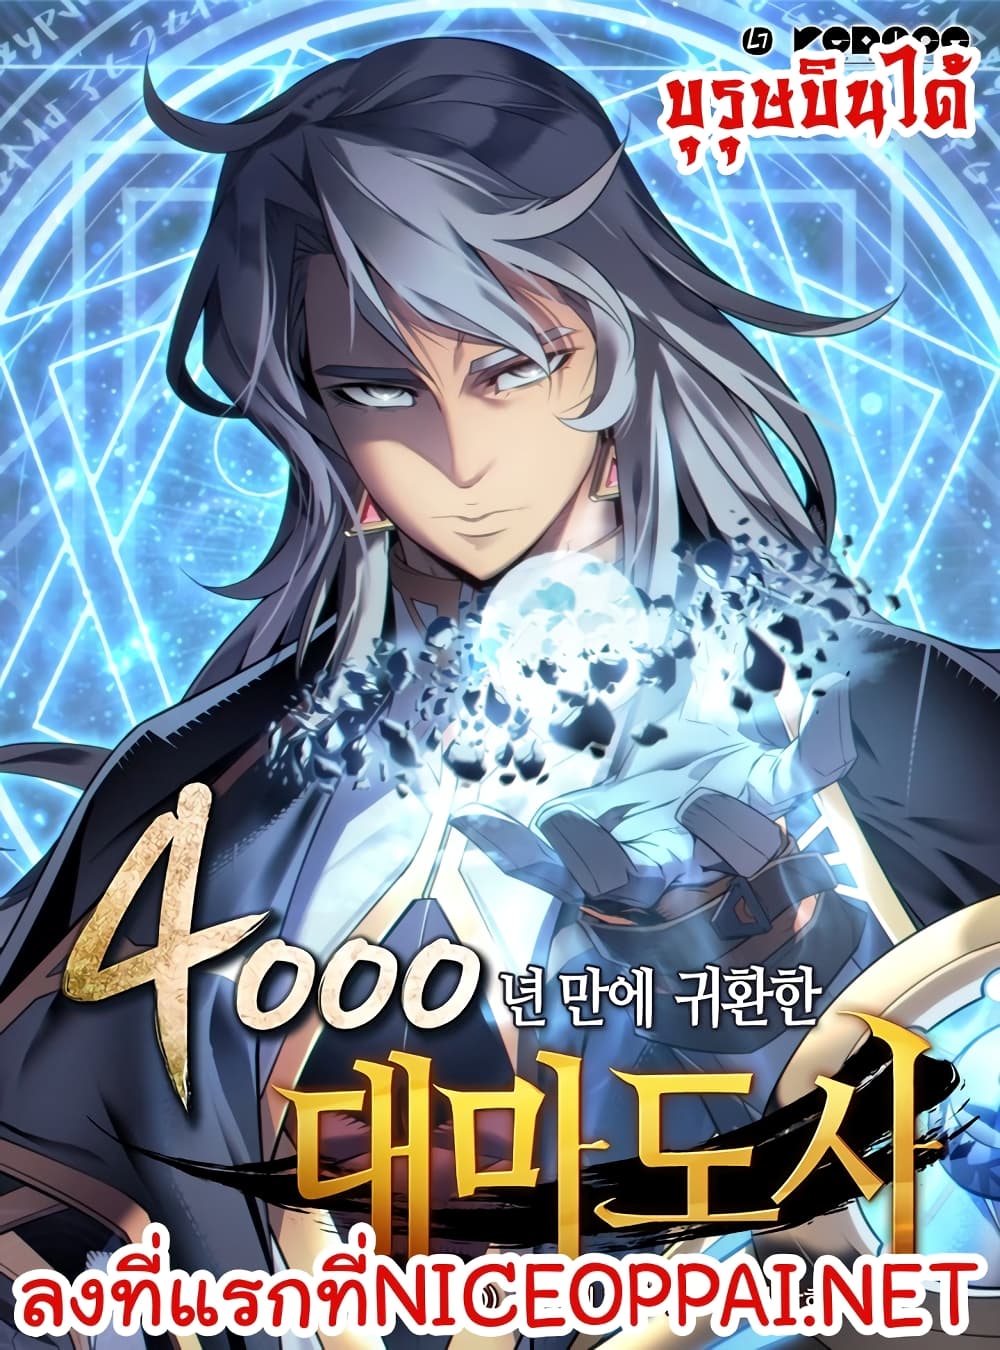 The Great Mage Returns After 4000 Years 39 (1)